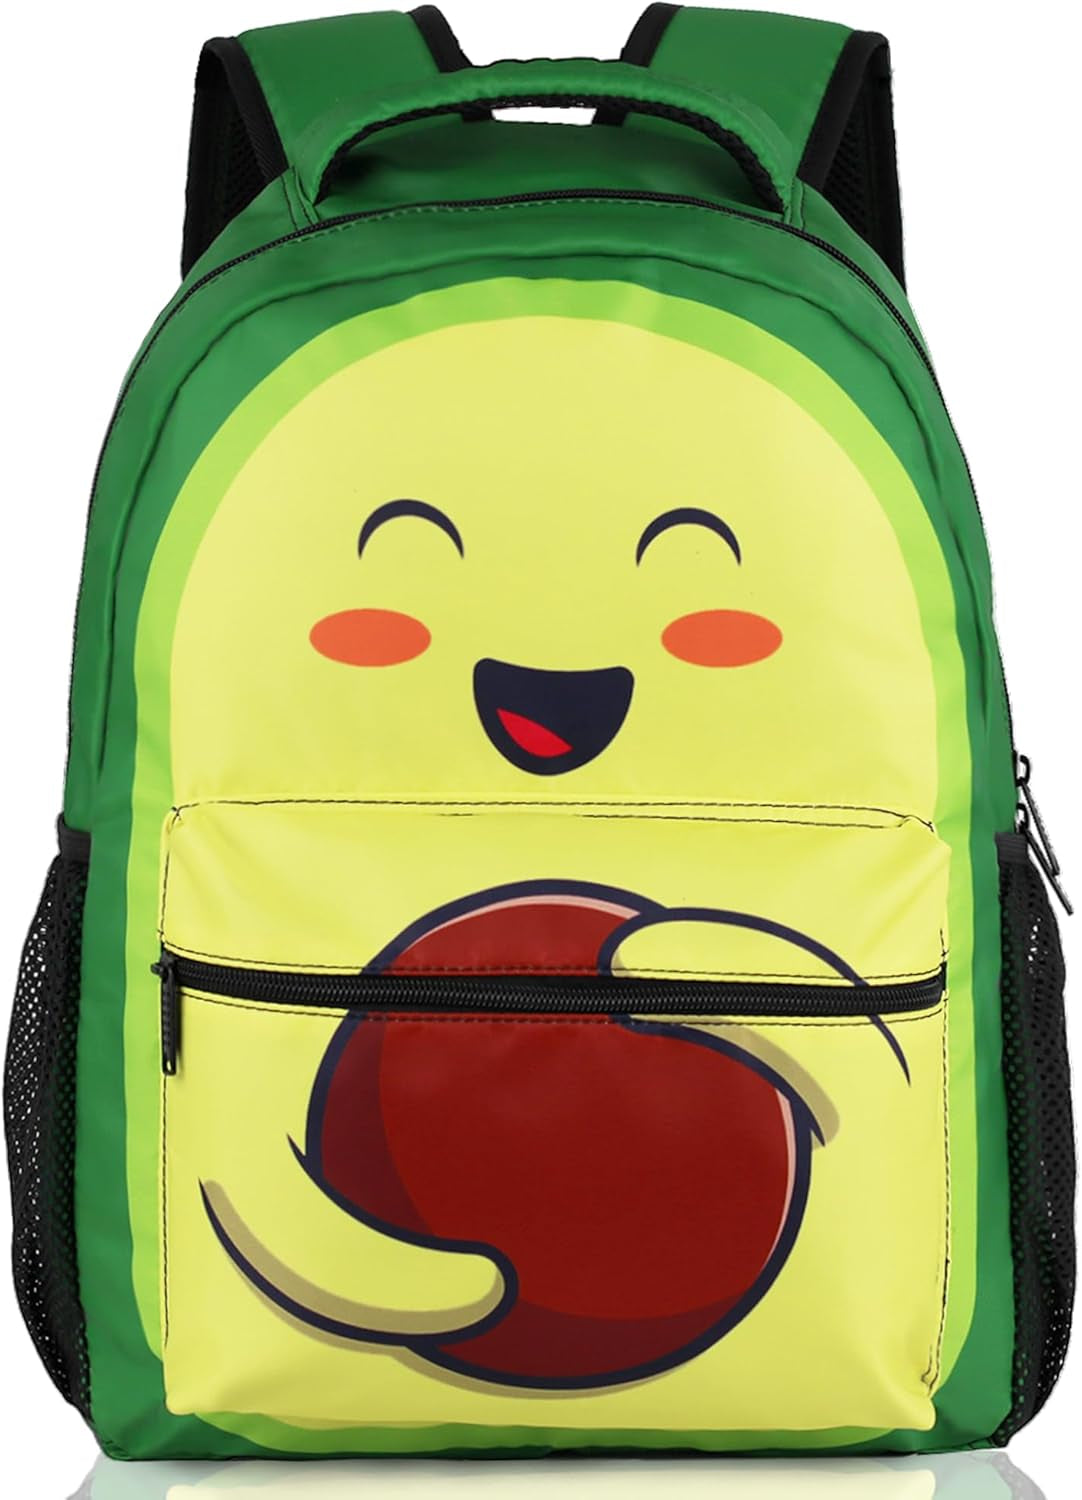 Cute Avocado Backpack for Boys Girls, Laptop Travel Laptop Daypack School Bag with Multiple Pockets for Kids 17 Inch